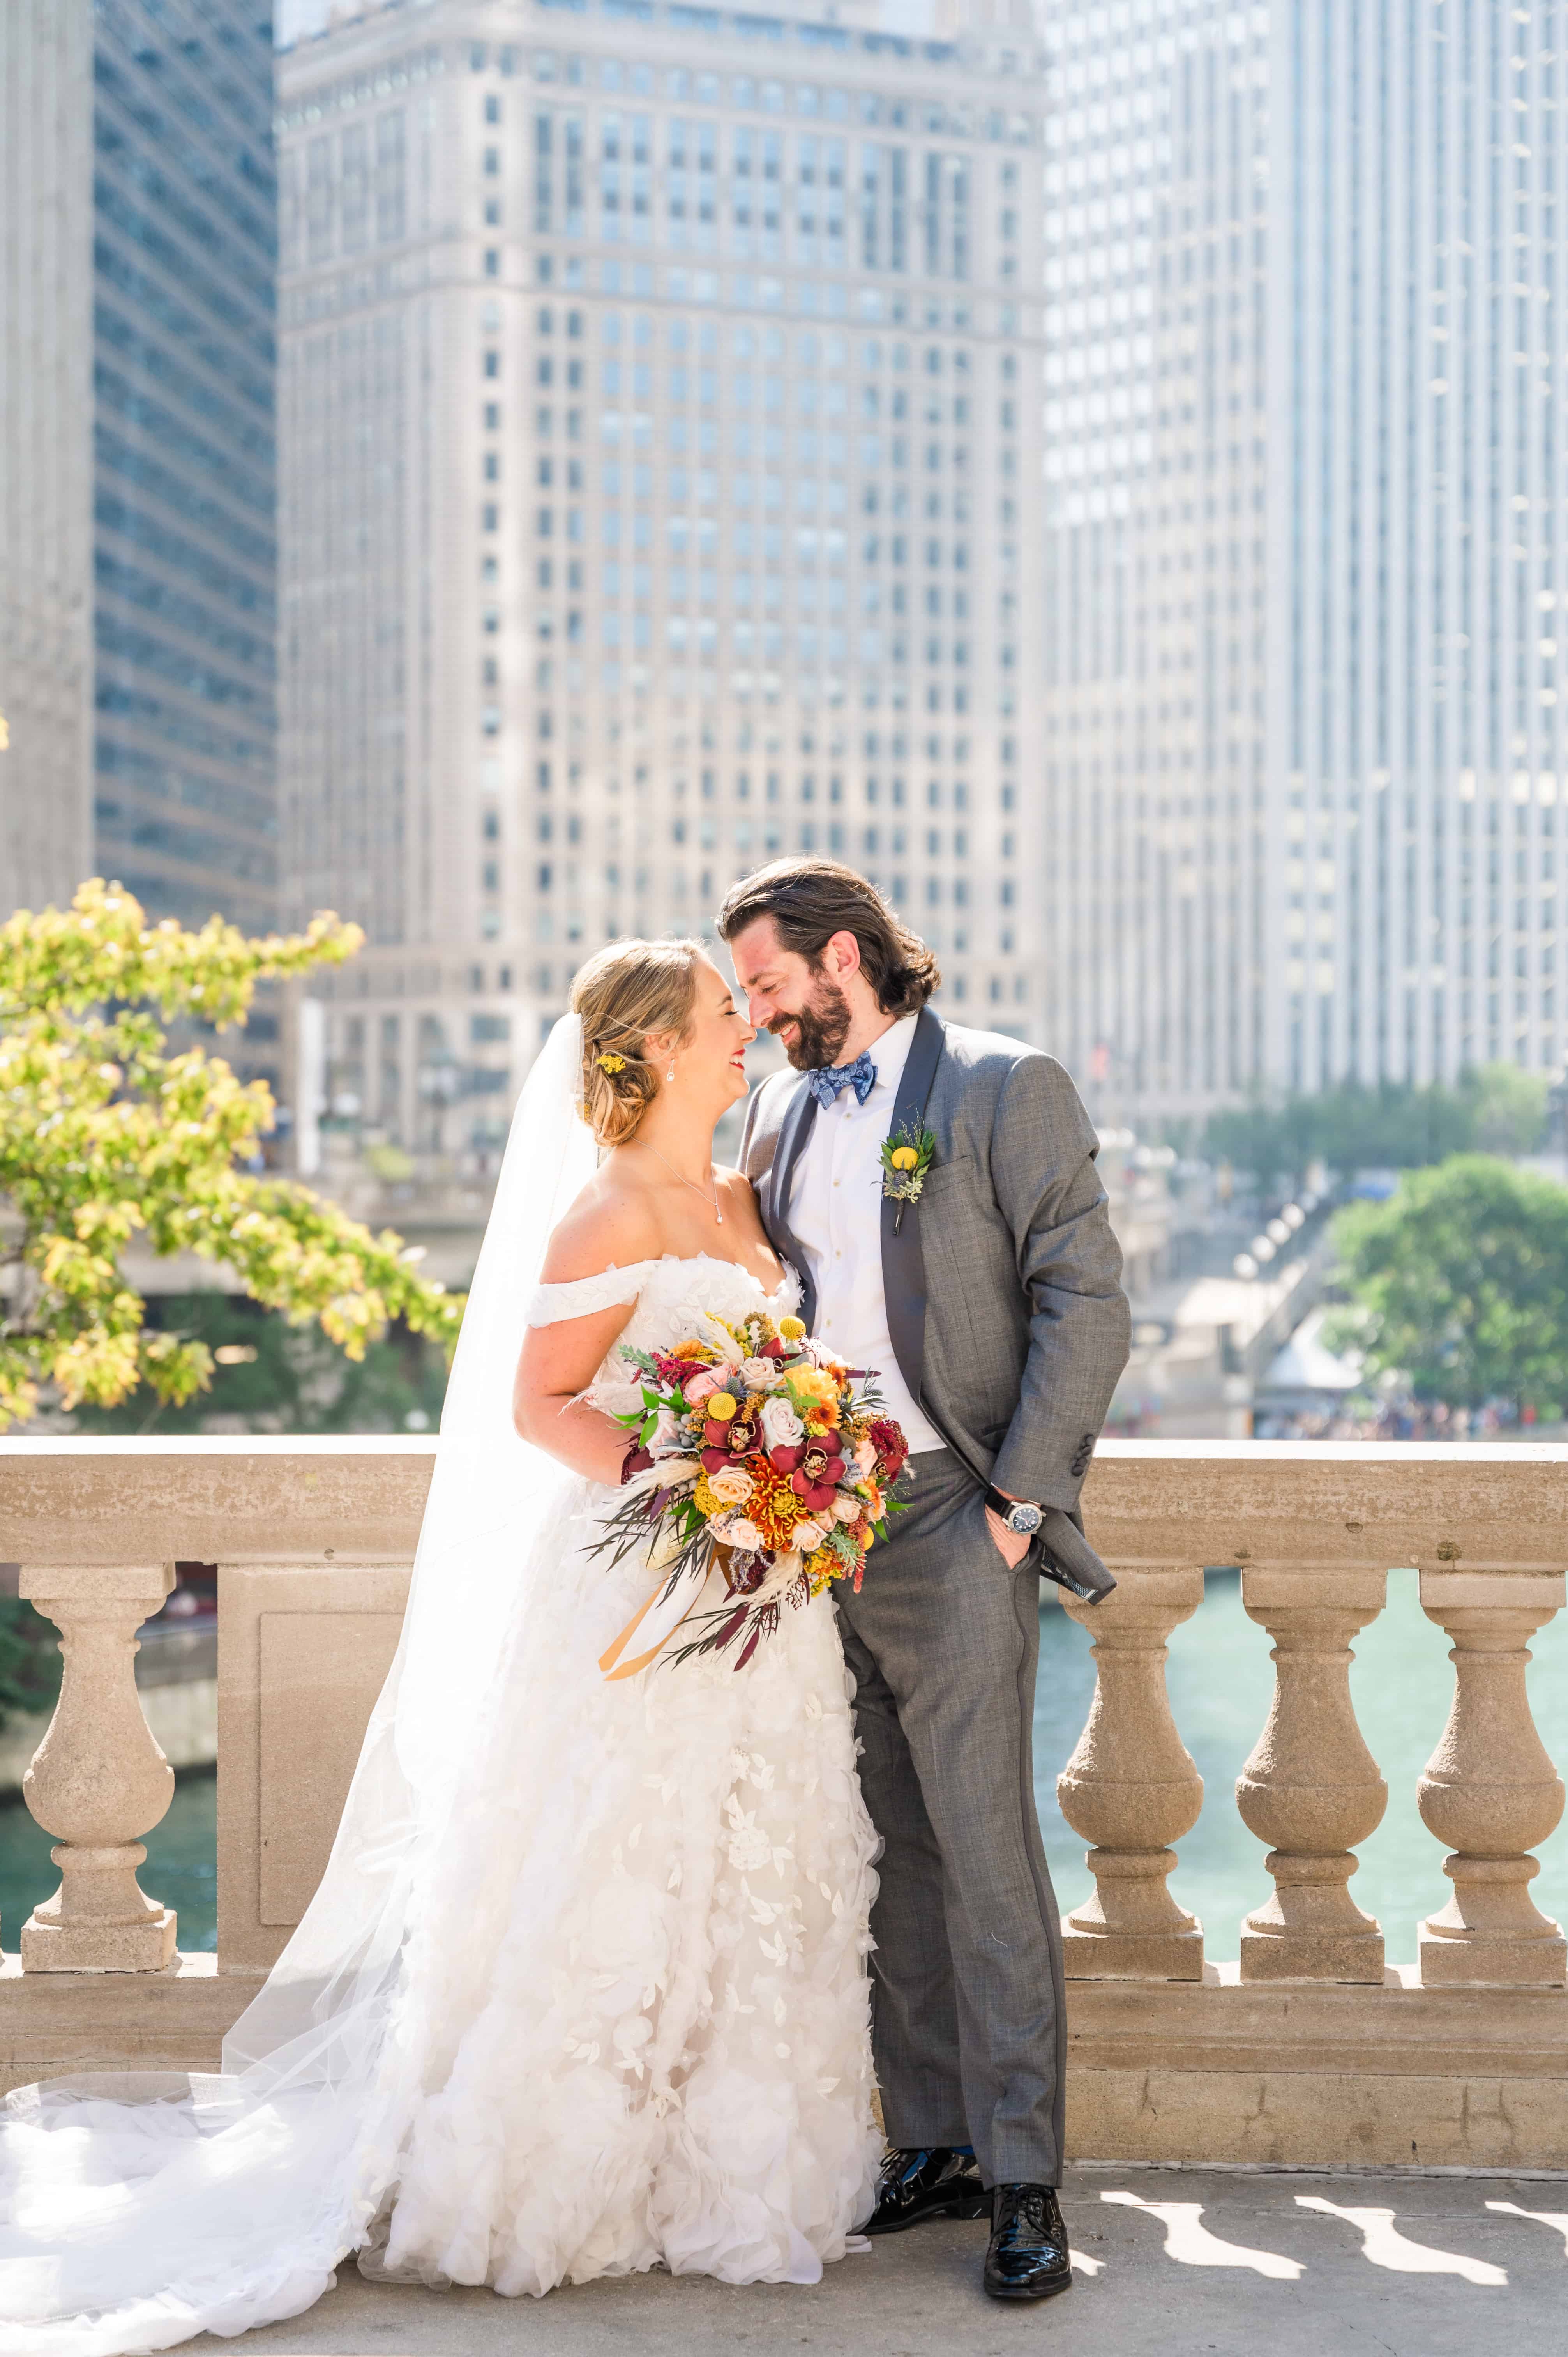 Sunny wedding portrait at the wrigley building in downtown Chicago